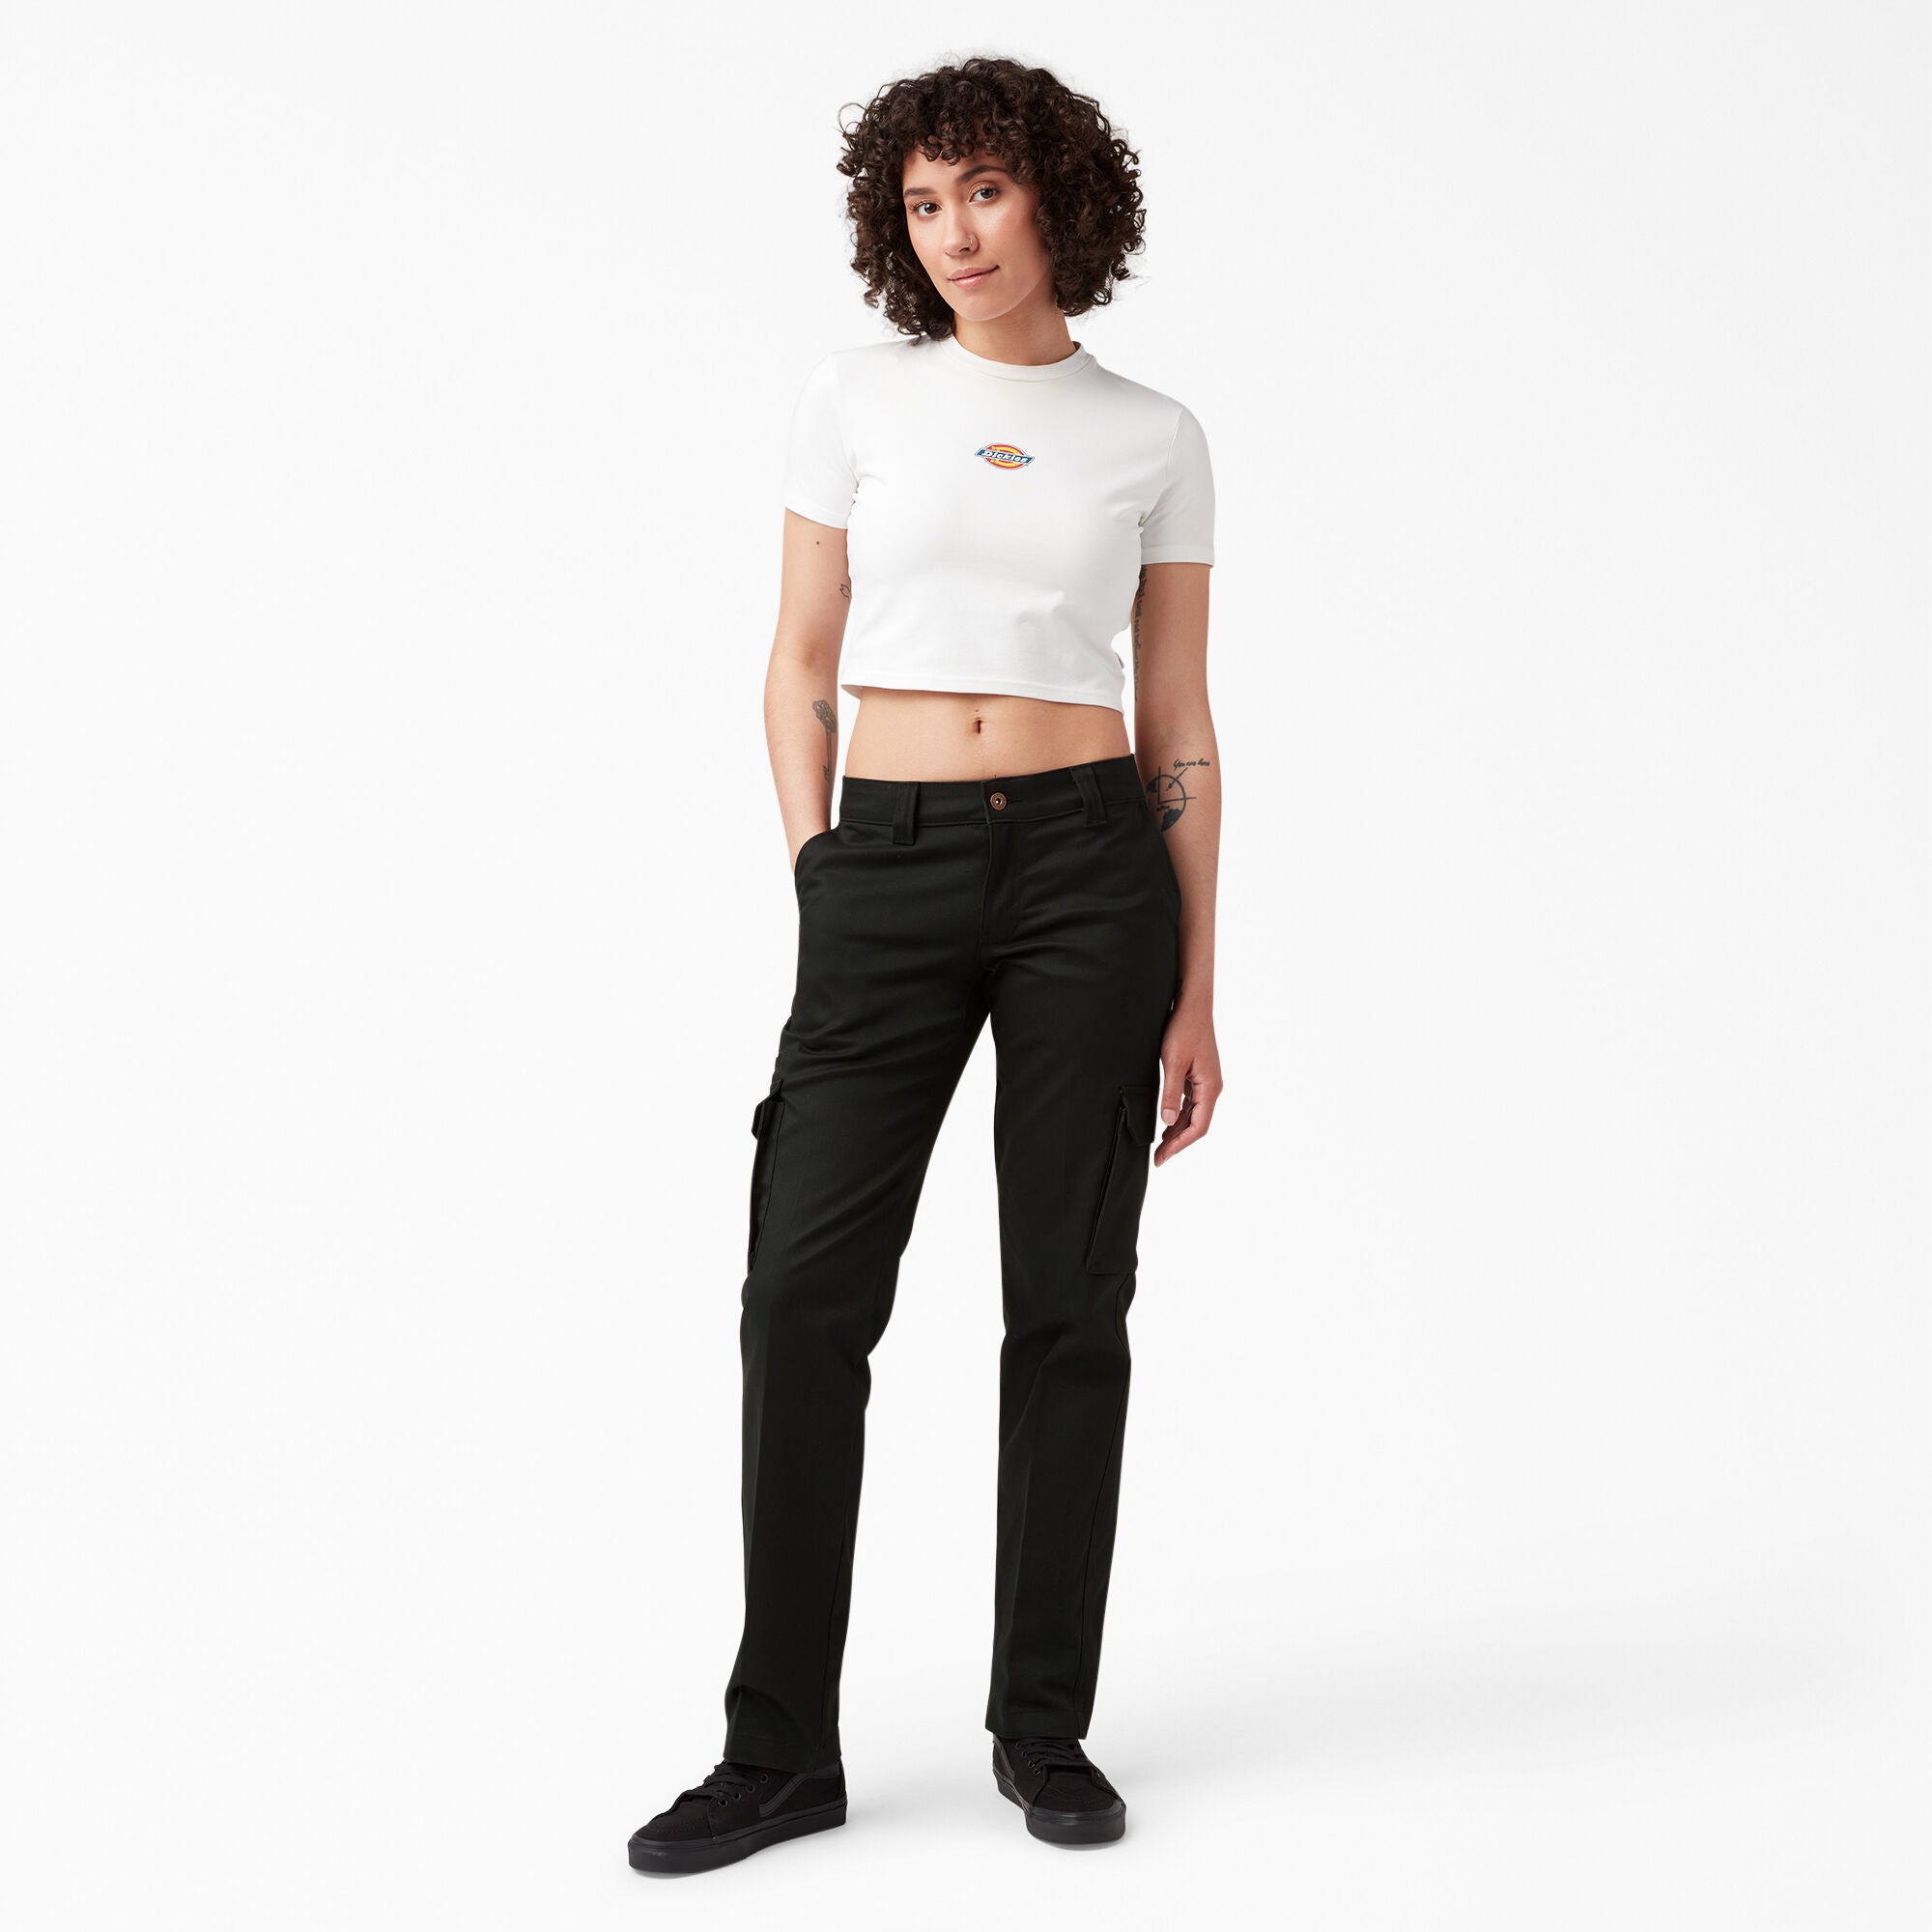 Dickies Women's Relaxed Fit Cargo Pant – Oregon Clothing Program